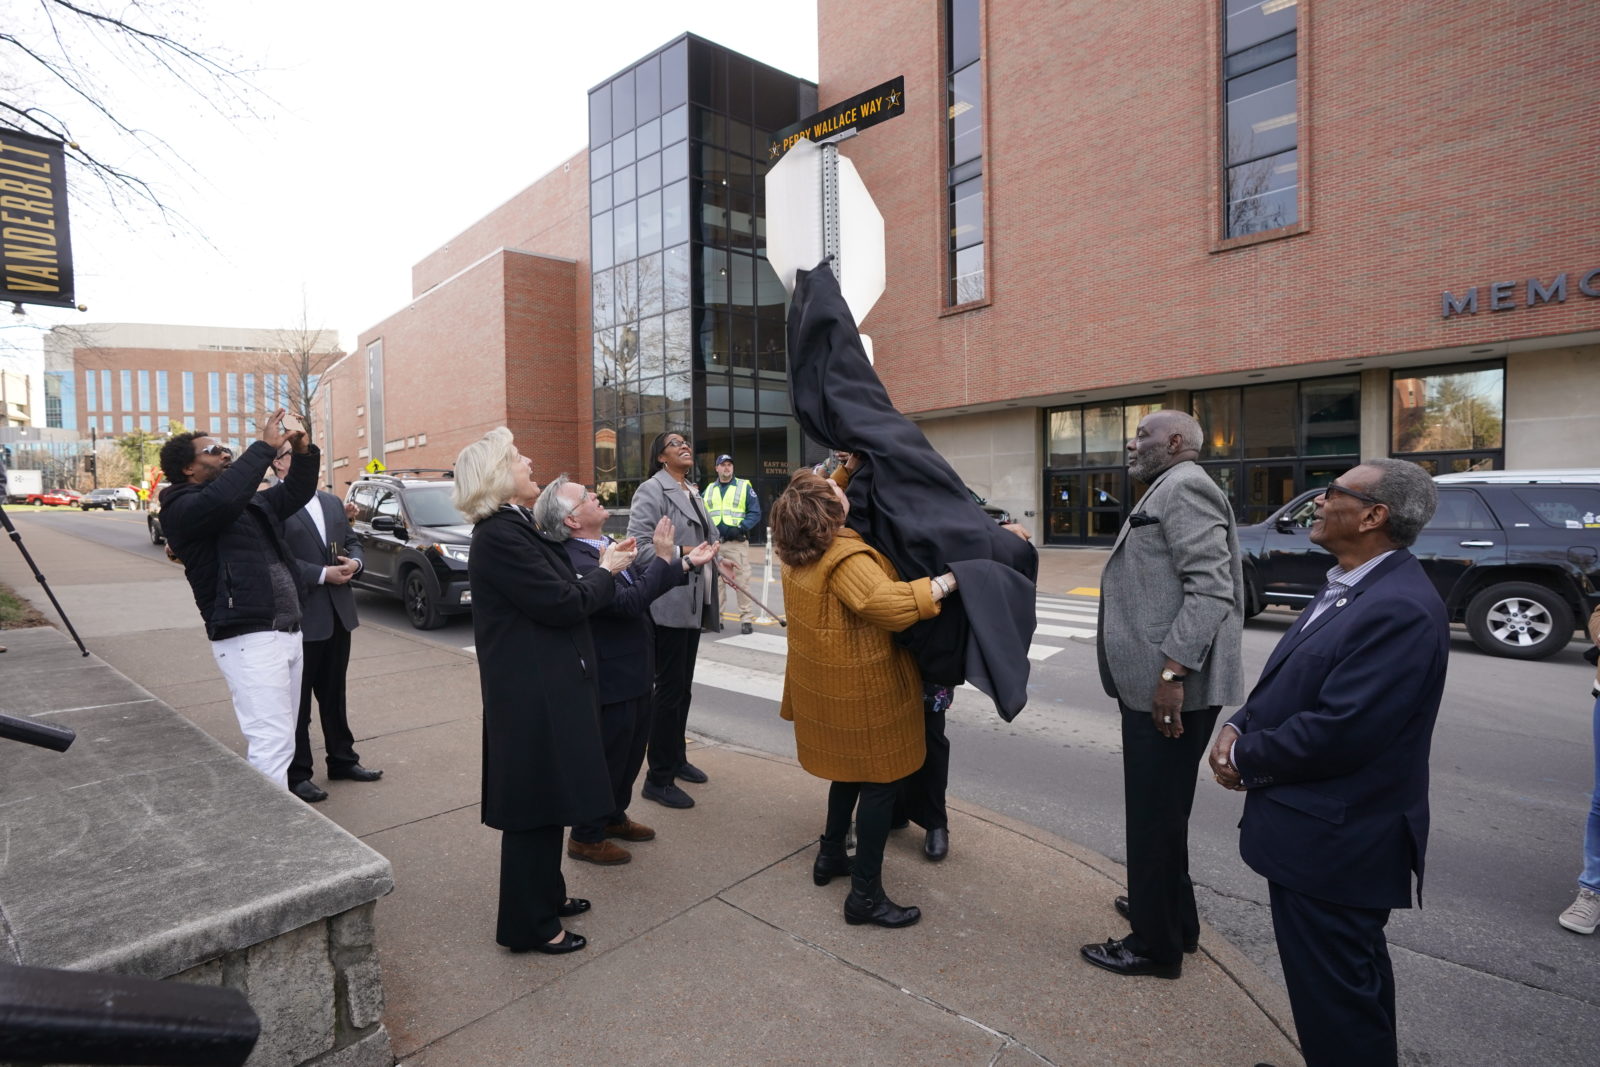 Unveiling the Perry Wallace Way sign on Saturday, February 22. (John Russell/Vanderbilt)